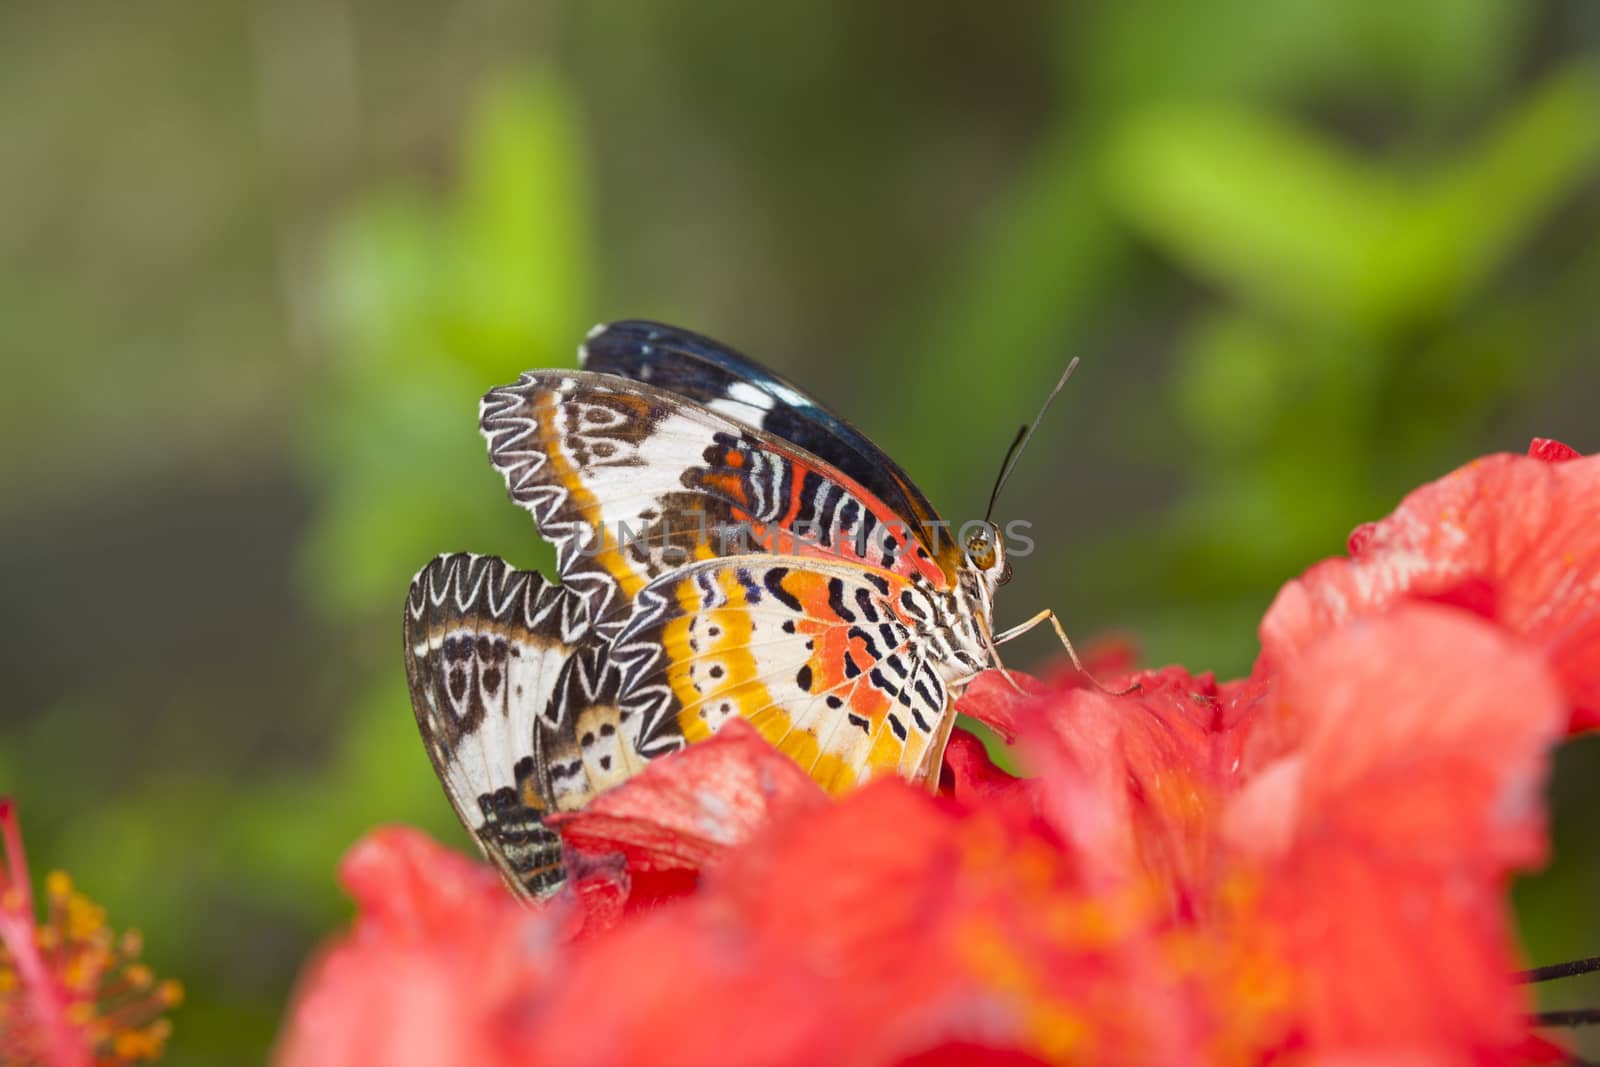 Exotic Butterfly on flowers, beautiful butterfly and flower in the garden of tropical Bali island, Indonesia. Close Up butterfly on flower.